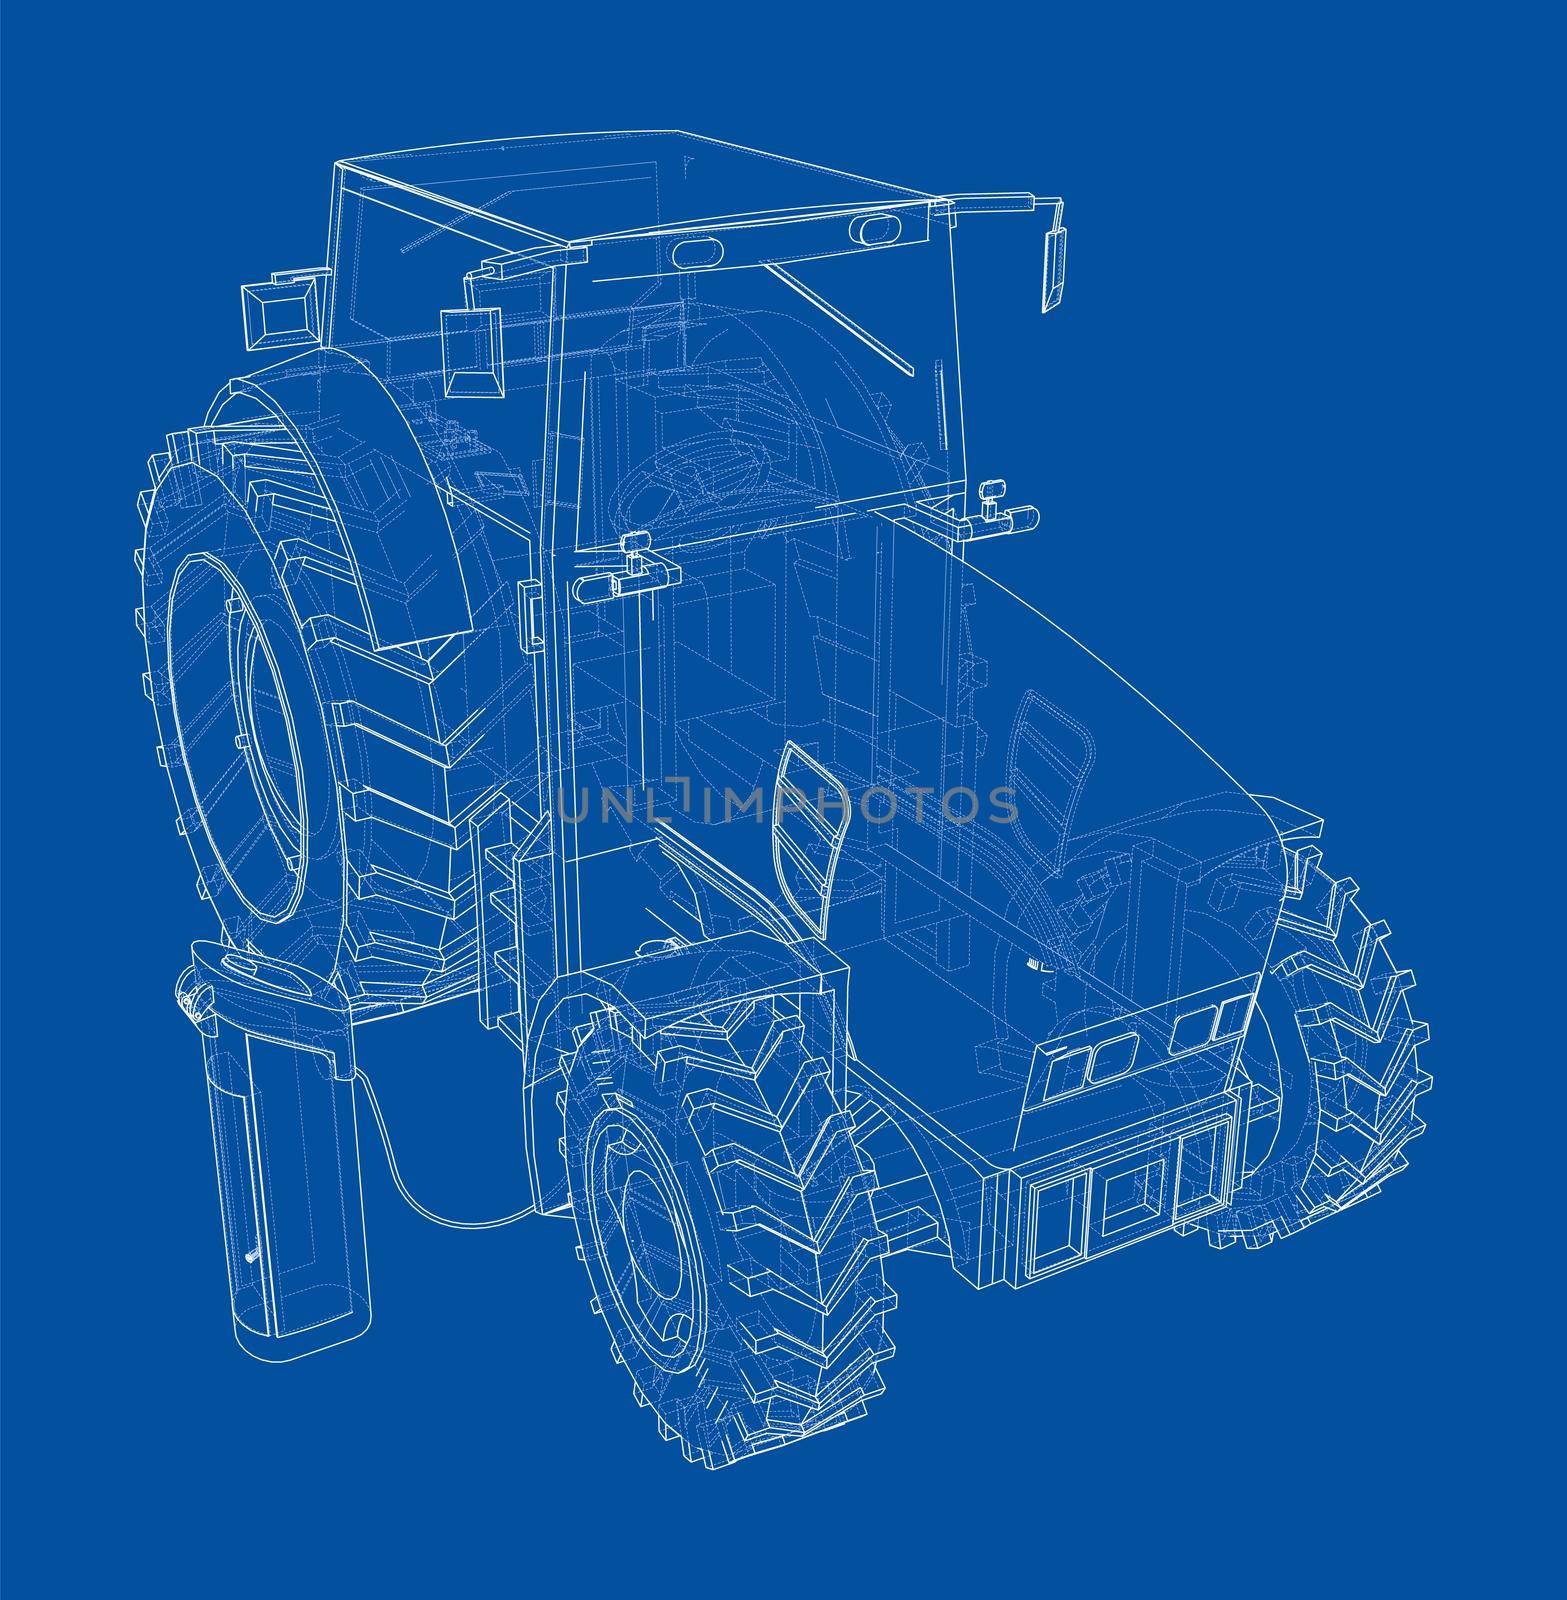 Electric Farm Tractor Charging Station Sketch. 3d illustration